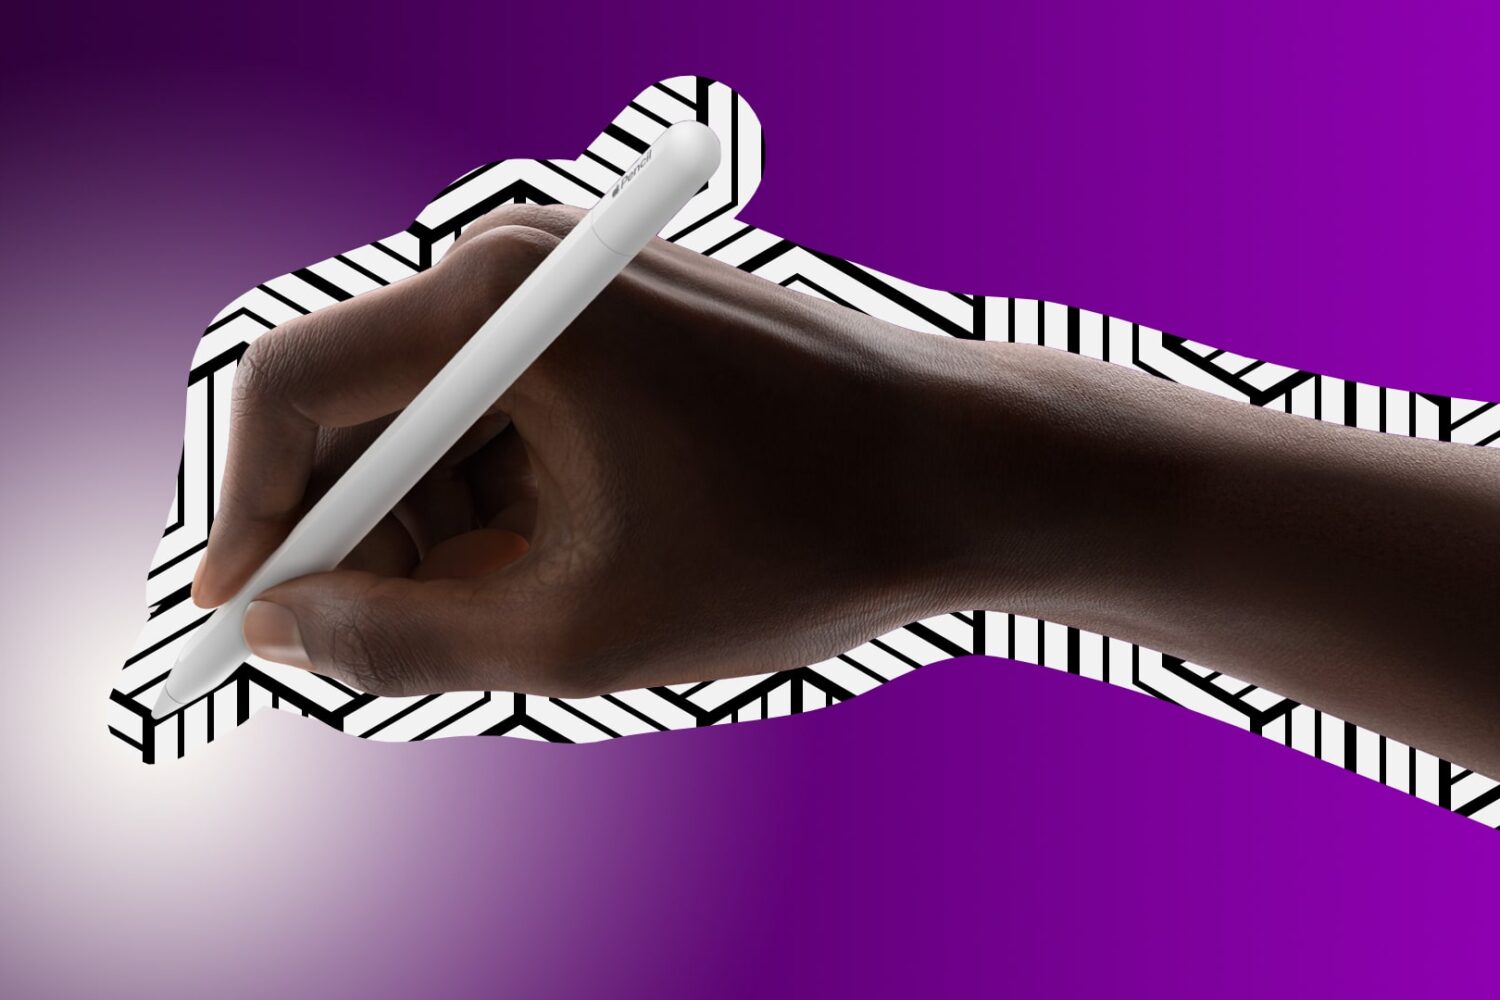 Male hand holding the USB-C Apple Pencil, set against a dark purple gradient background